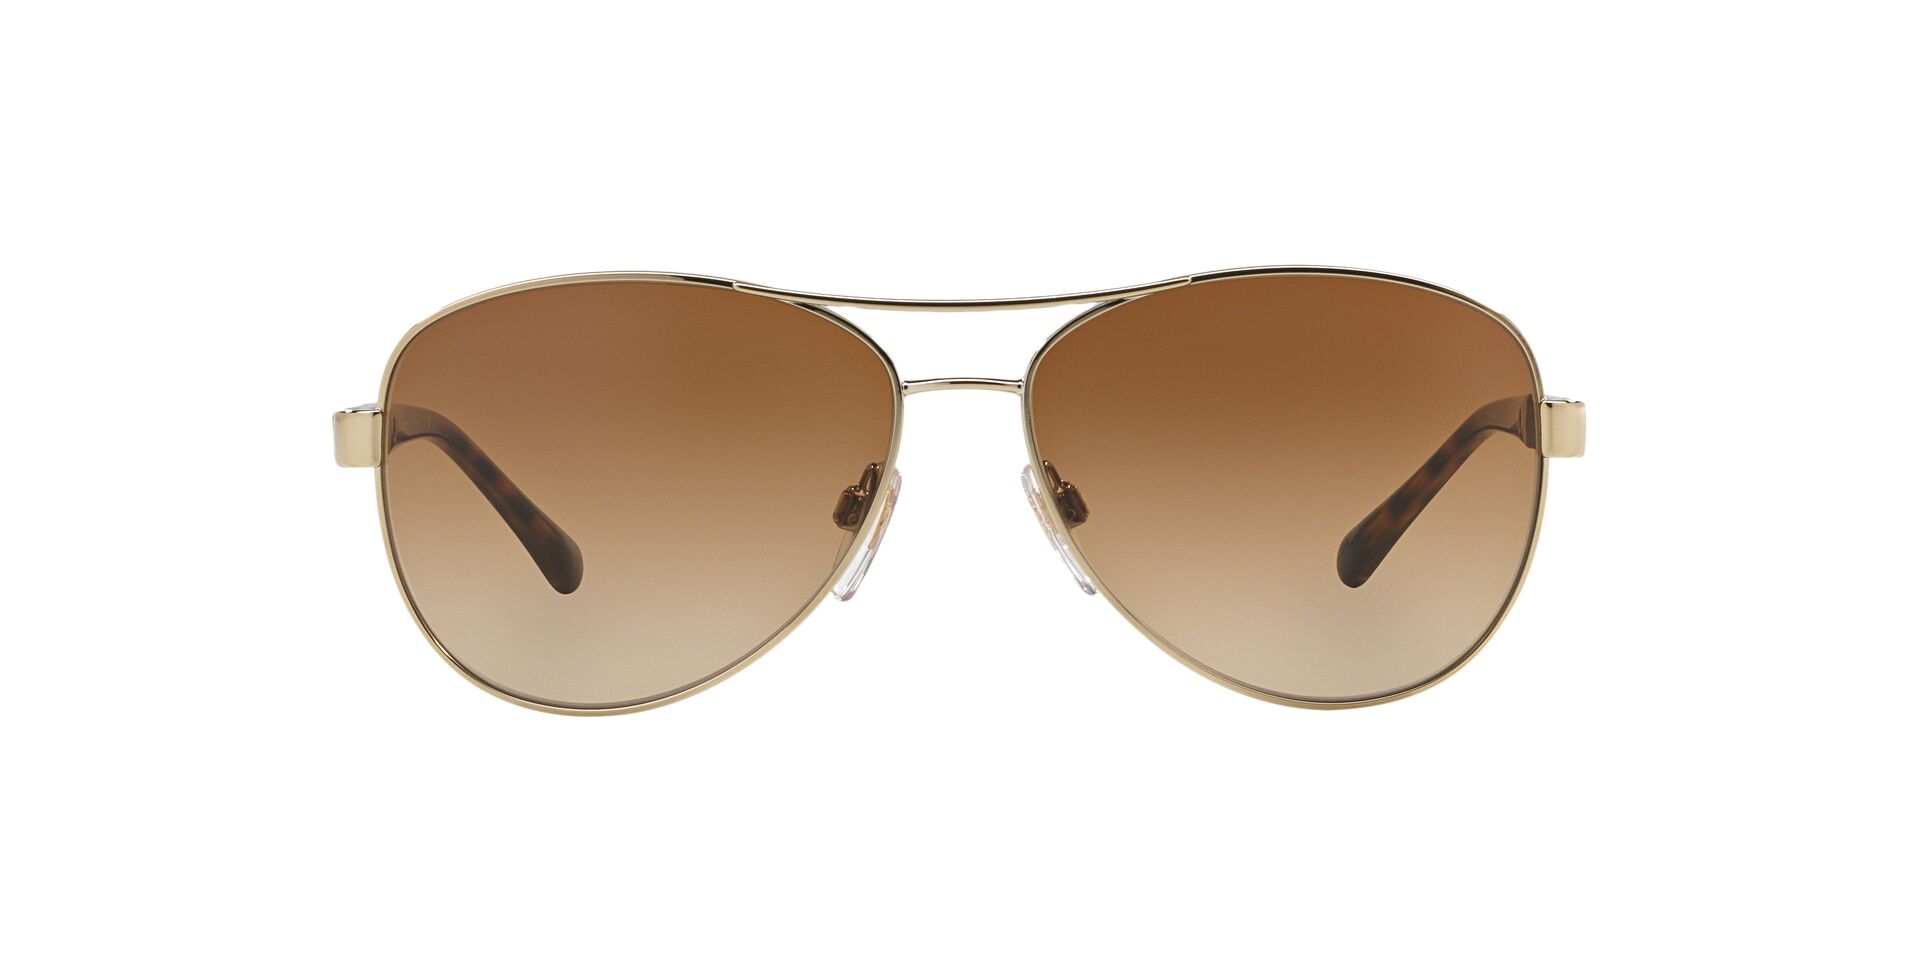 Burberry Sunglasses - Buy Burberry Sunglasses online in India